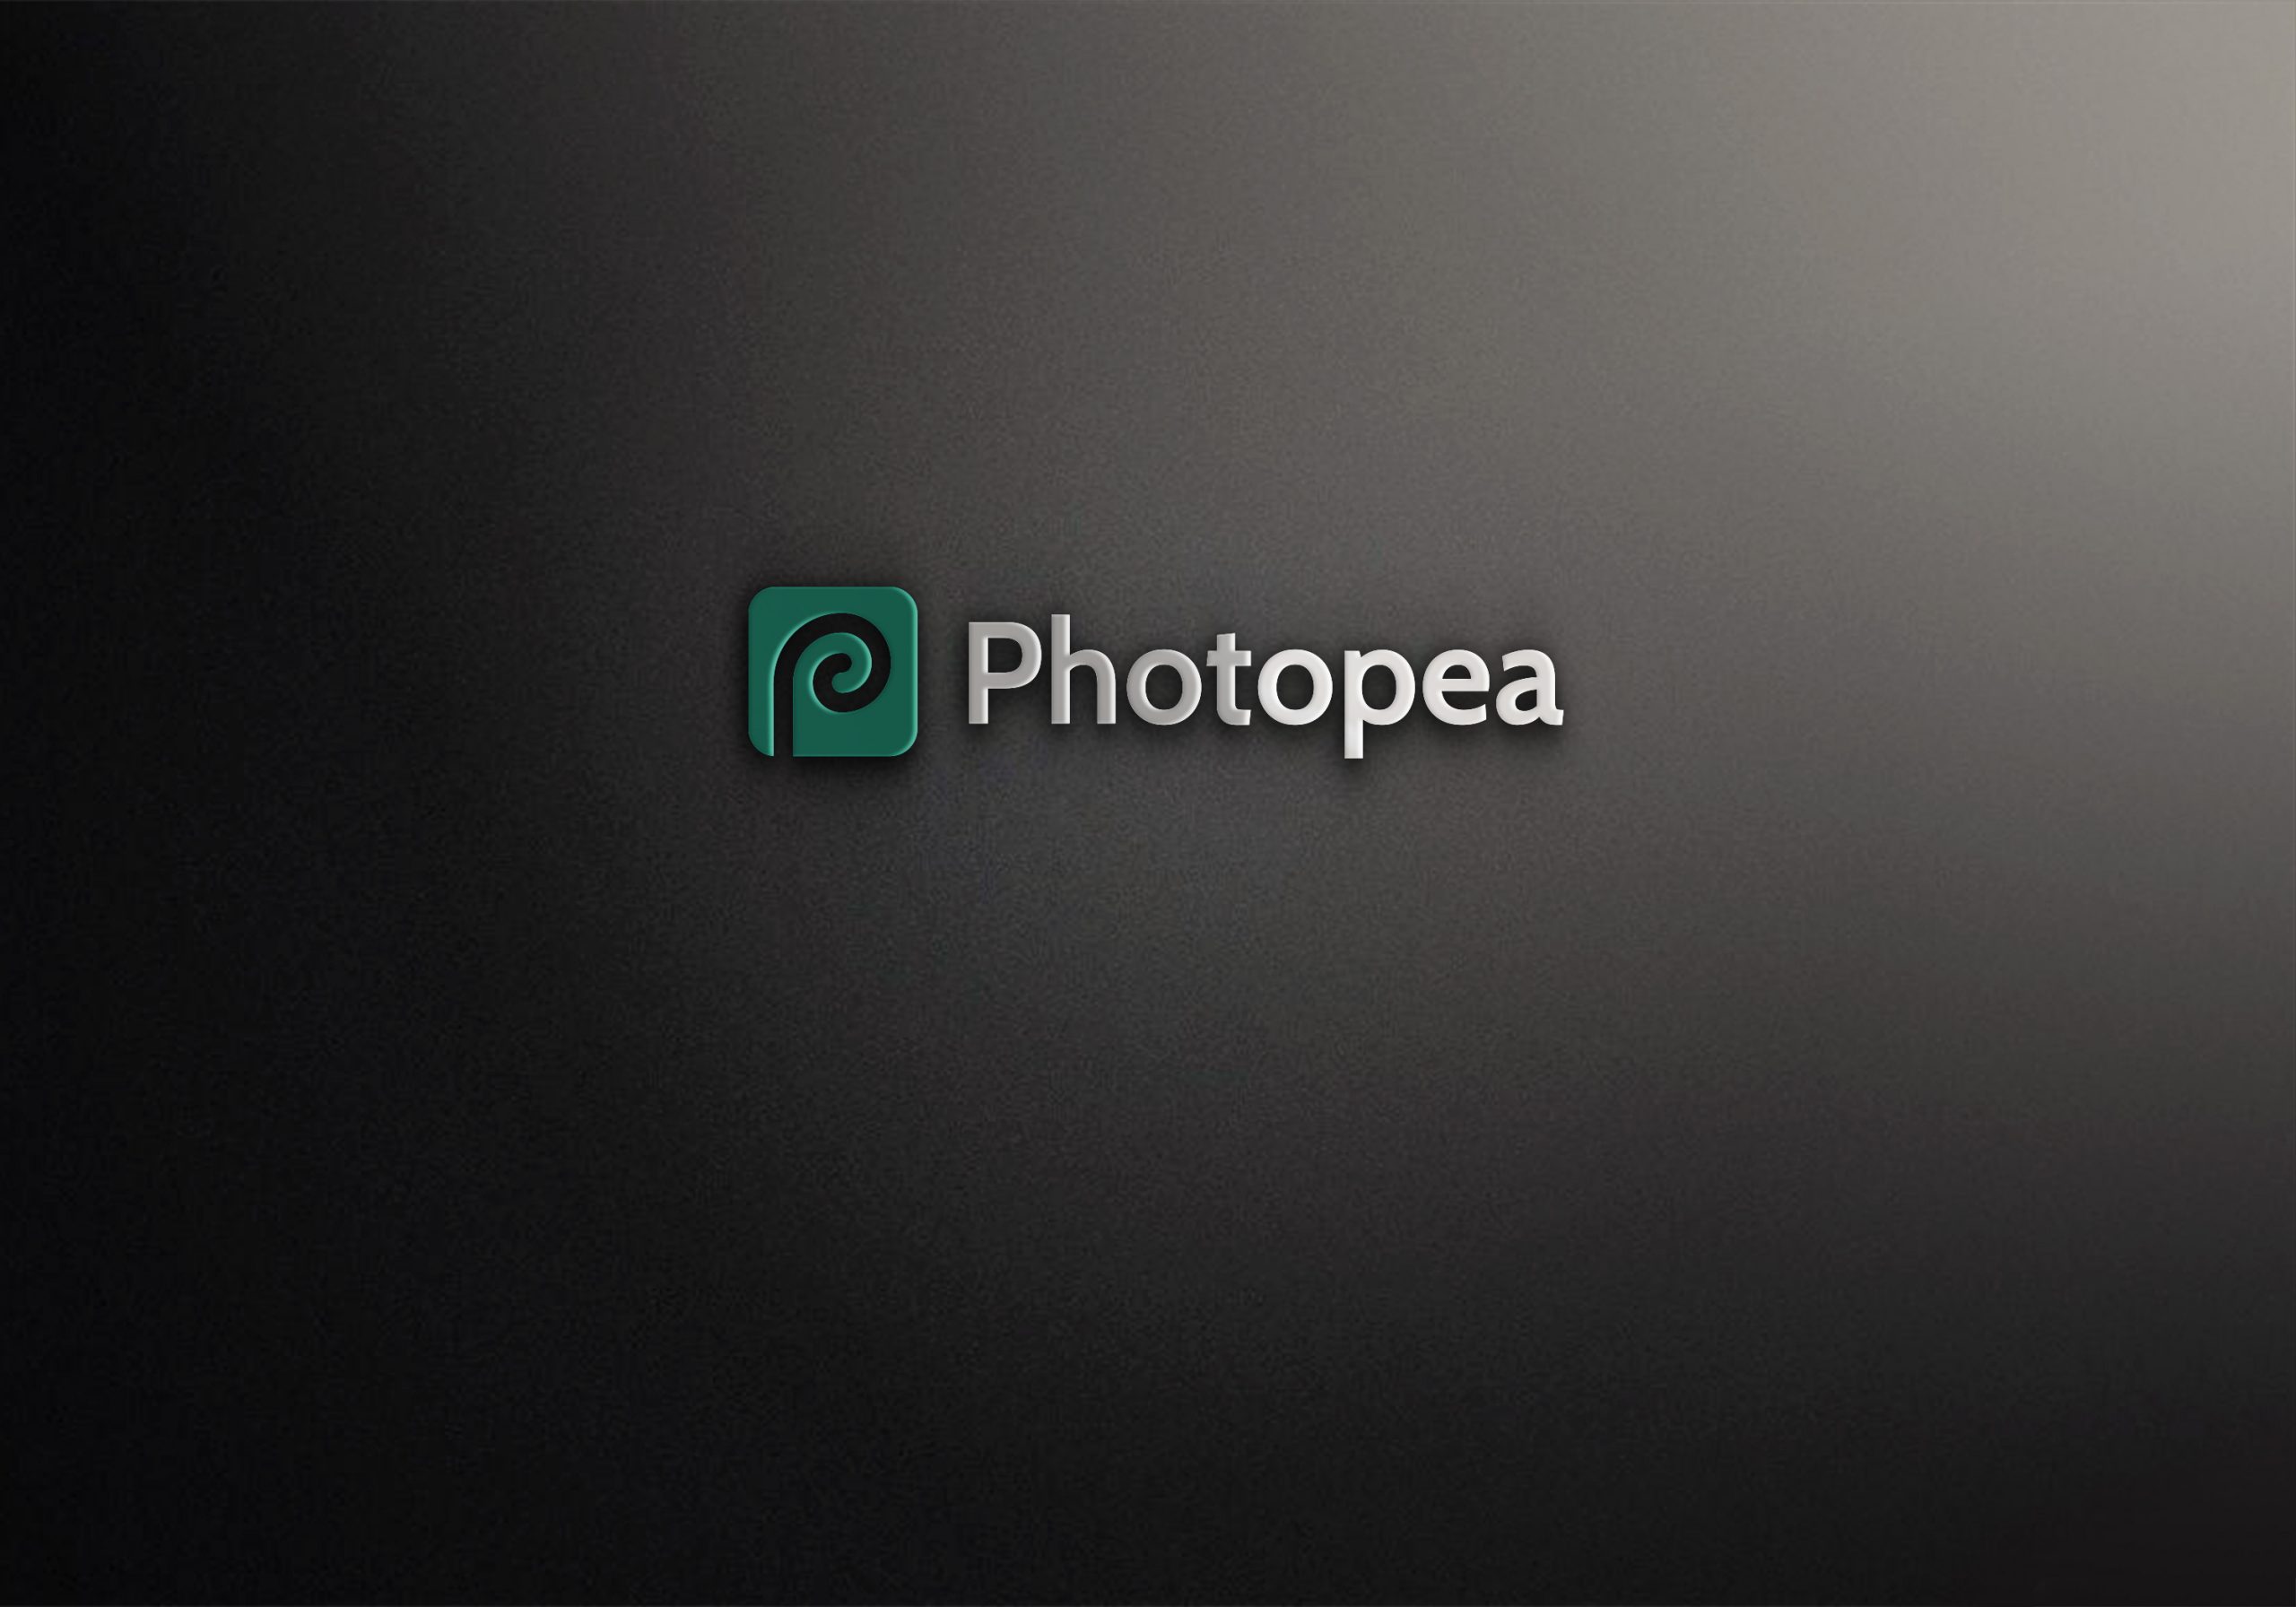 3D Logo Mockup on Black Wall by GraphicsFamily.com